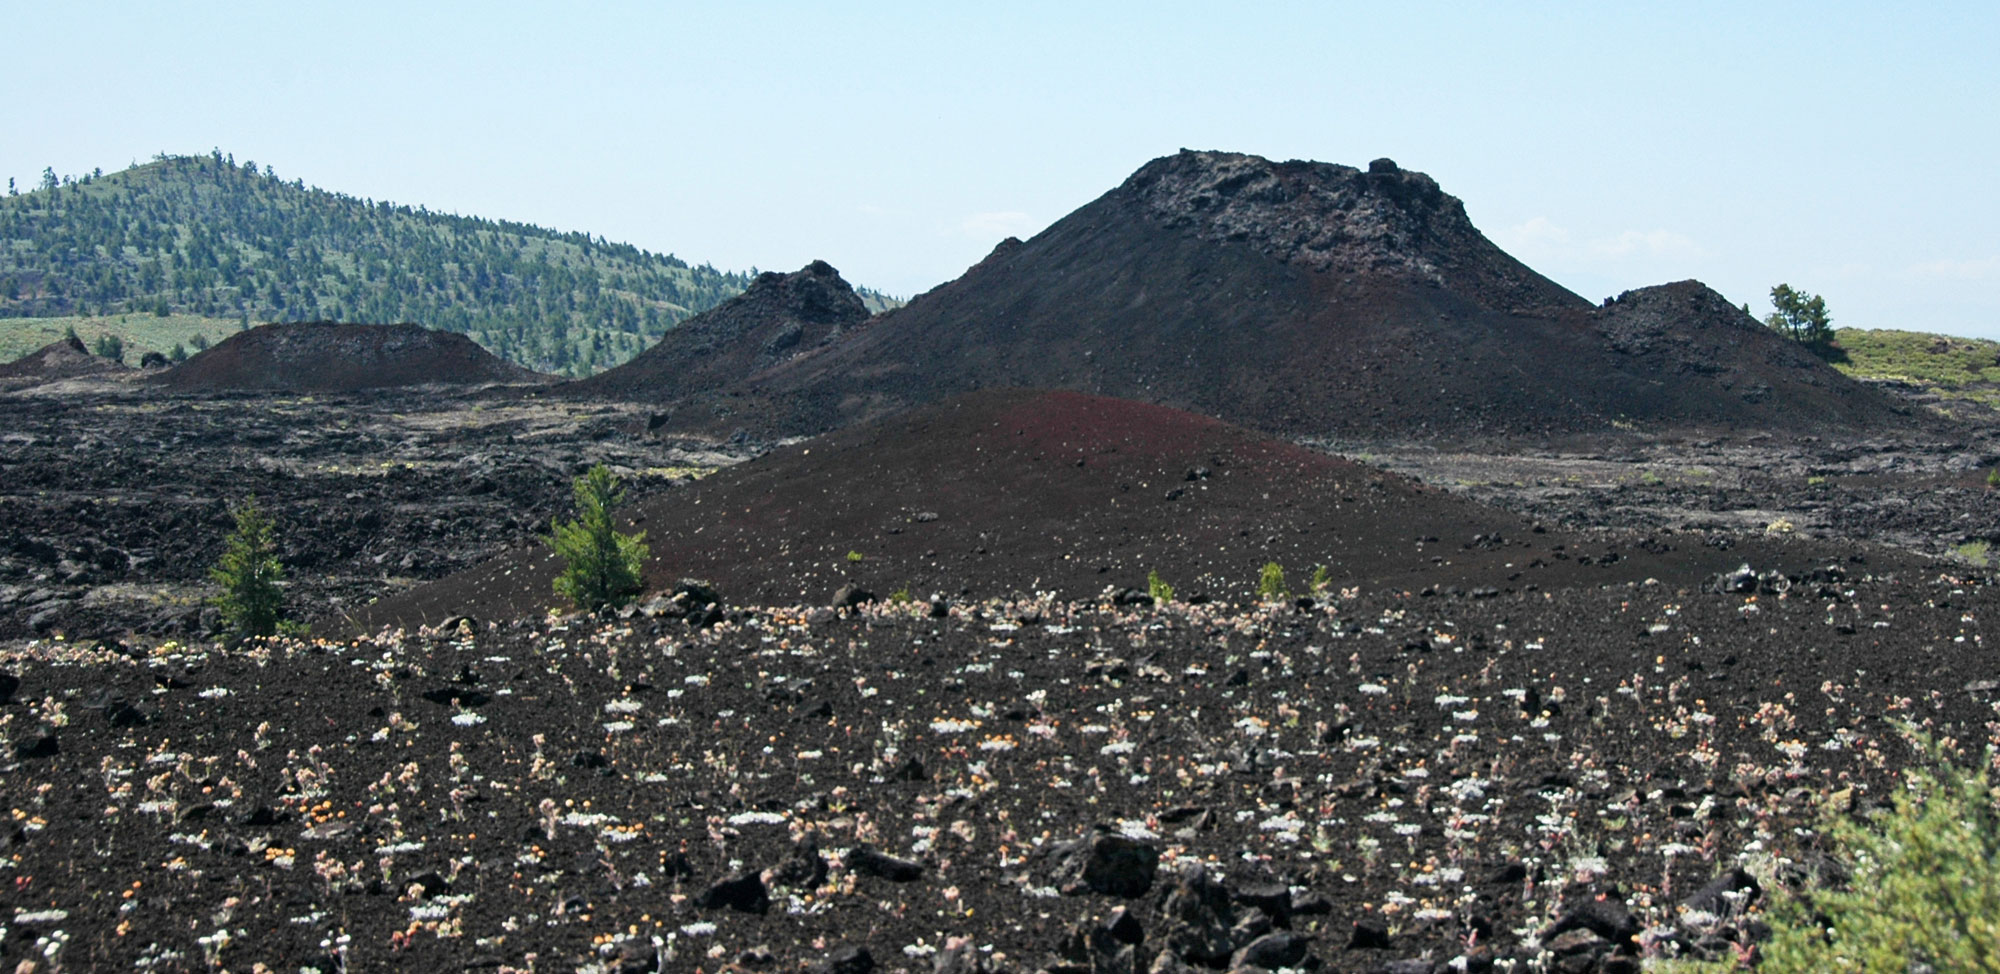 Photograph of volcanic spatter cones in Craters of the Moon National Monument, Idaho. The photo shows a series of low, black mounds on a landscape of coarse, black stones. A hill covered with conifers rises in the background.